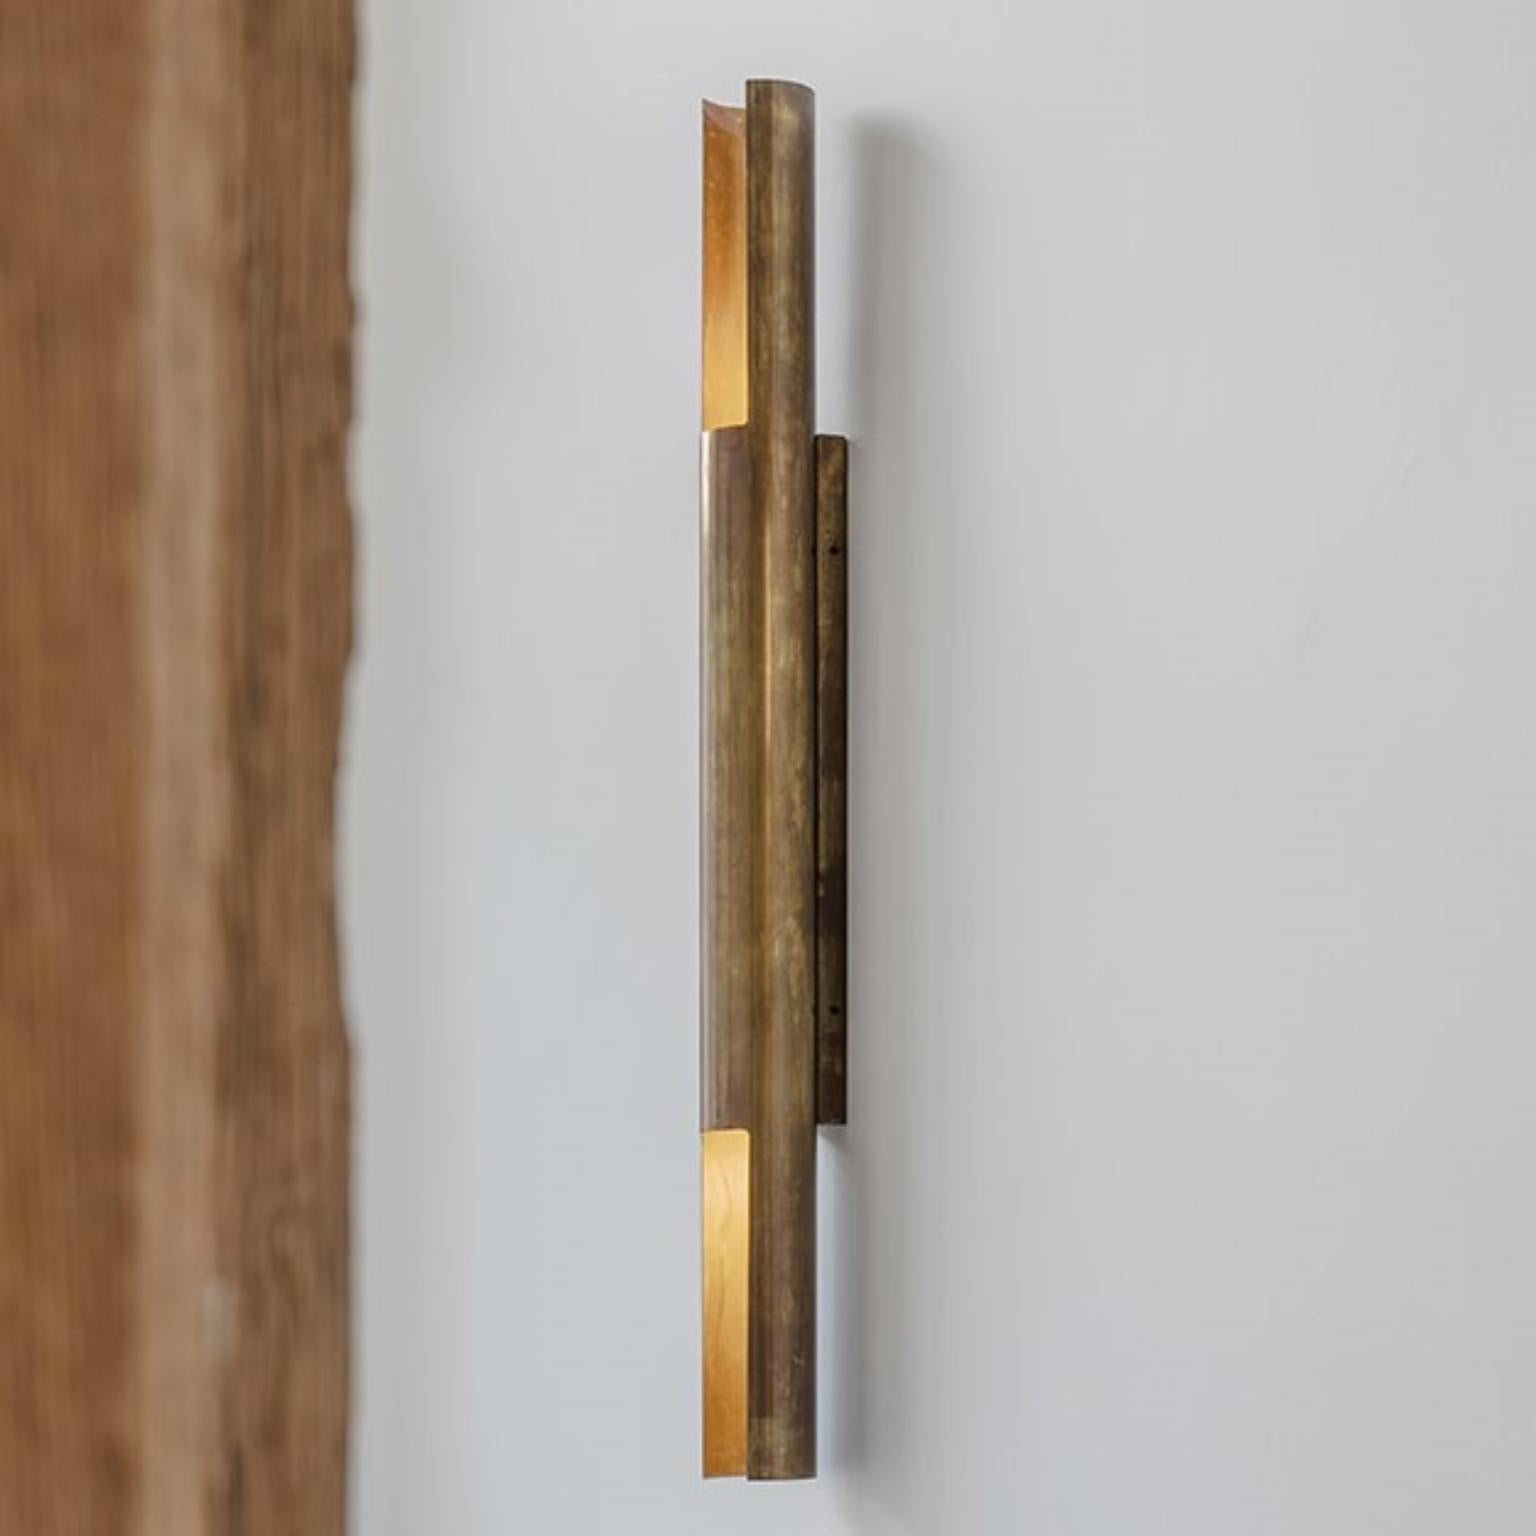 Unique Ferry wall lamp by Koen Van Guijze
Dimensions: 10 D x 120 H cm
Materials: Brass

Light inside a brutalist brass tube.

After a career of more than 25 years in the lighting business as a lighting architect, Koen van Guijze decided to create